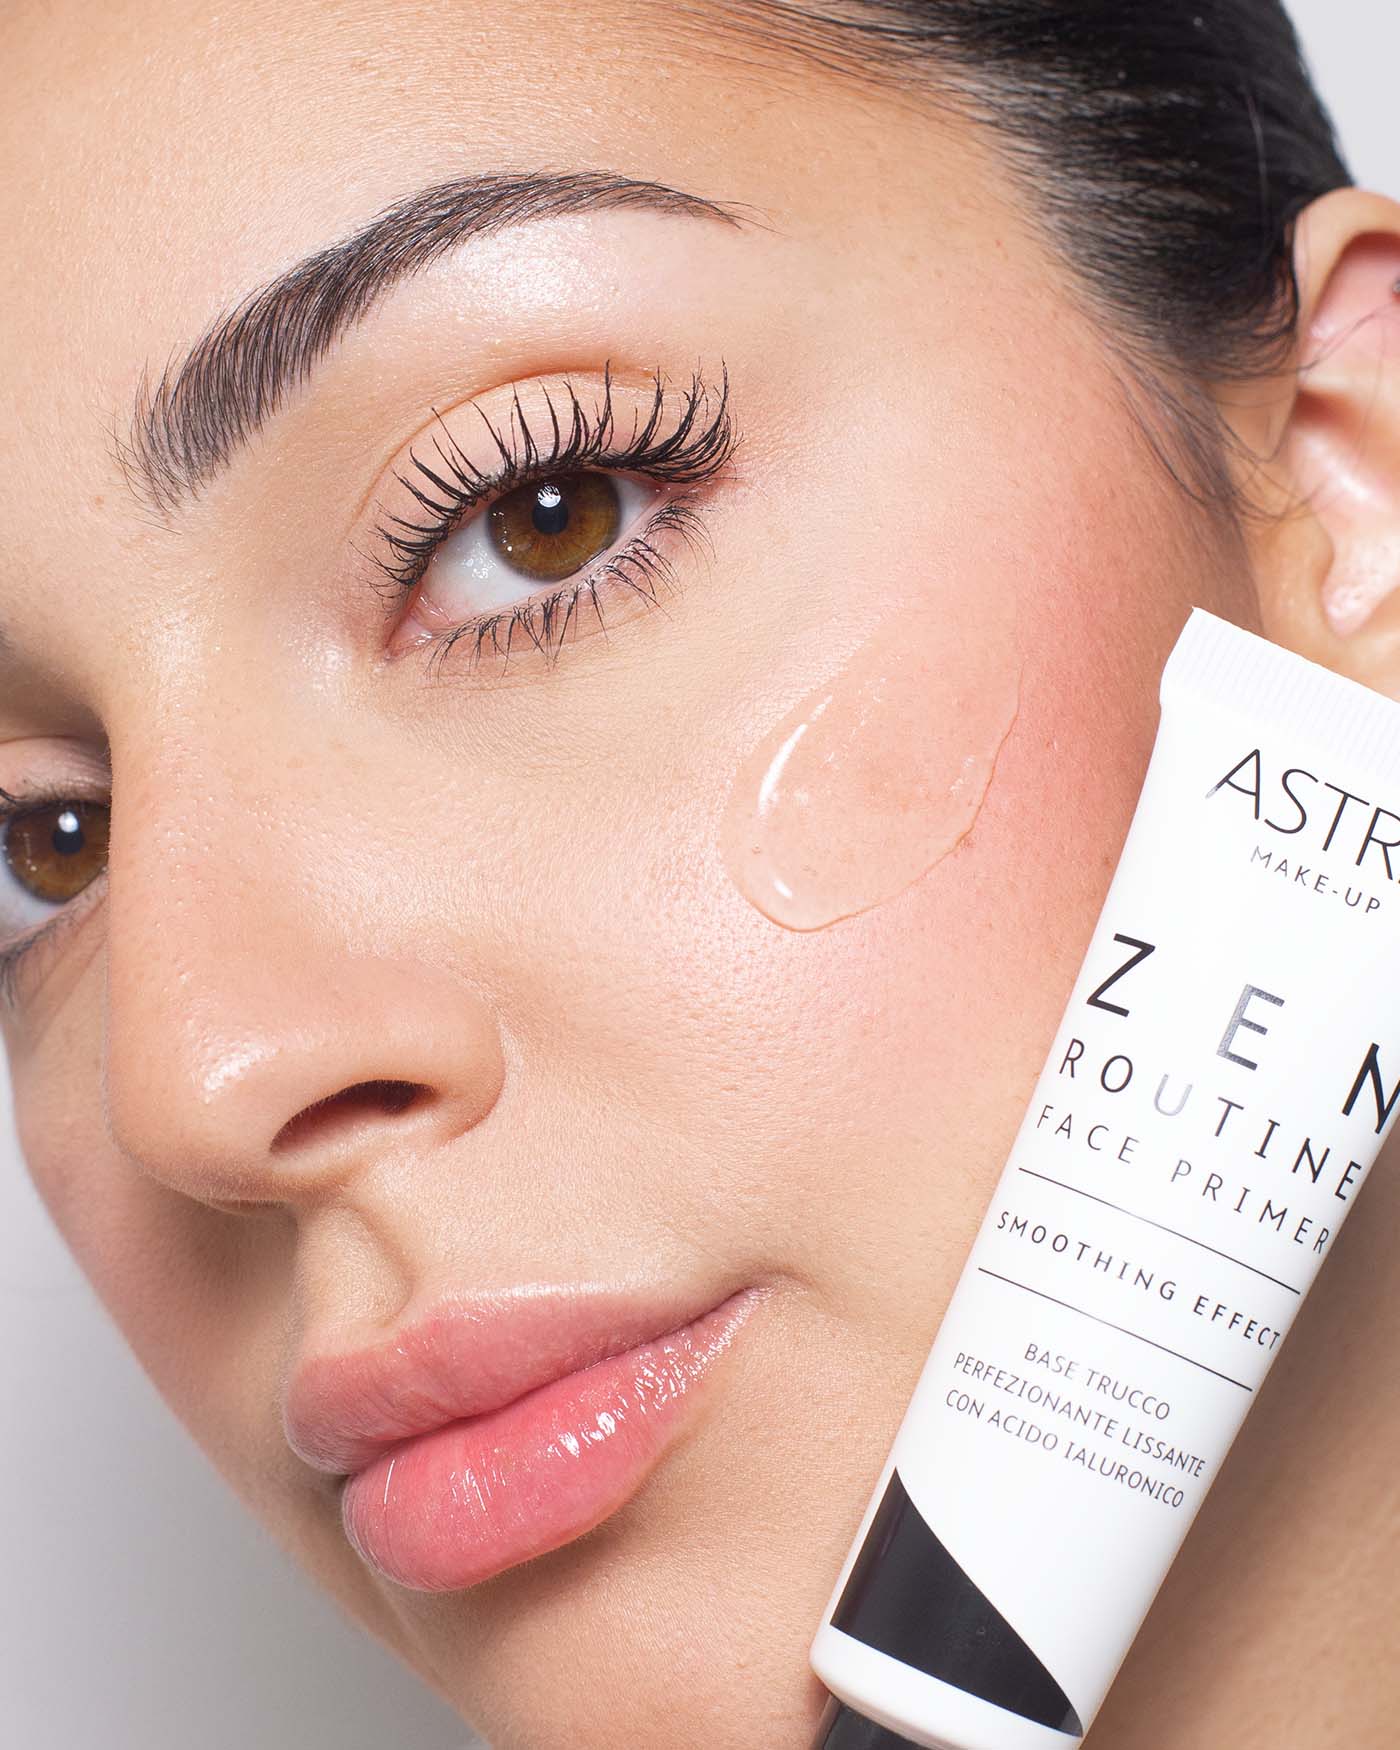 ZEN ROUTINE FACE PRIMER SMOOTHING EFFECT - All Products - Astra Make-Up